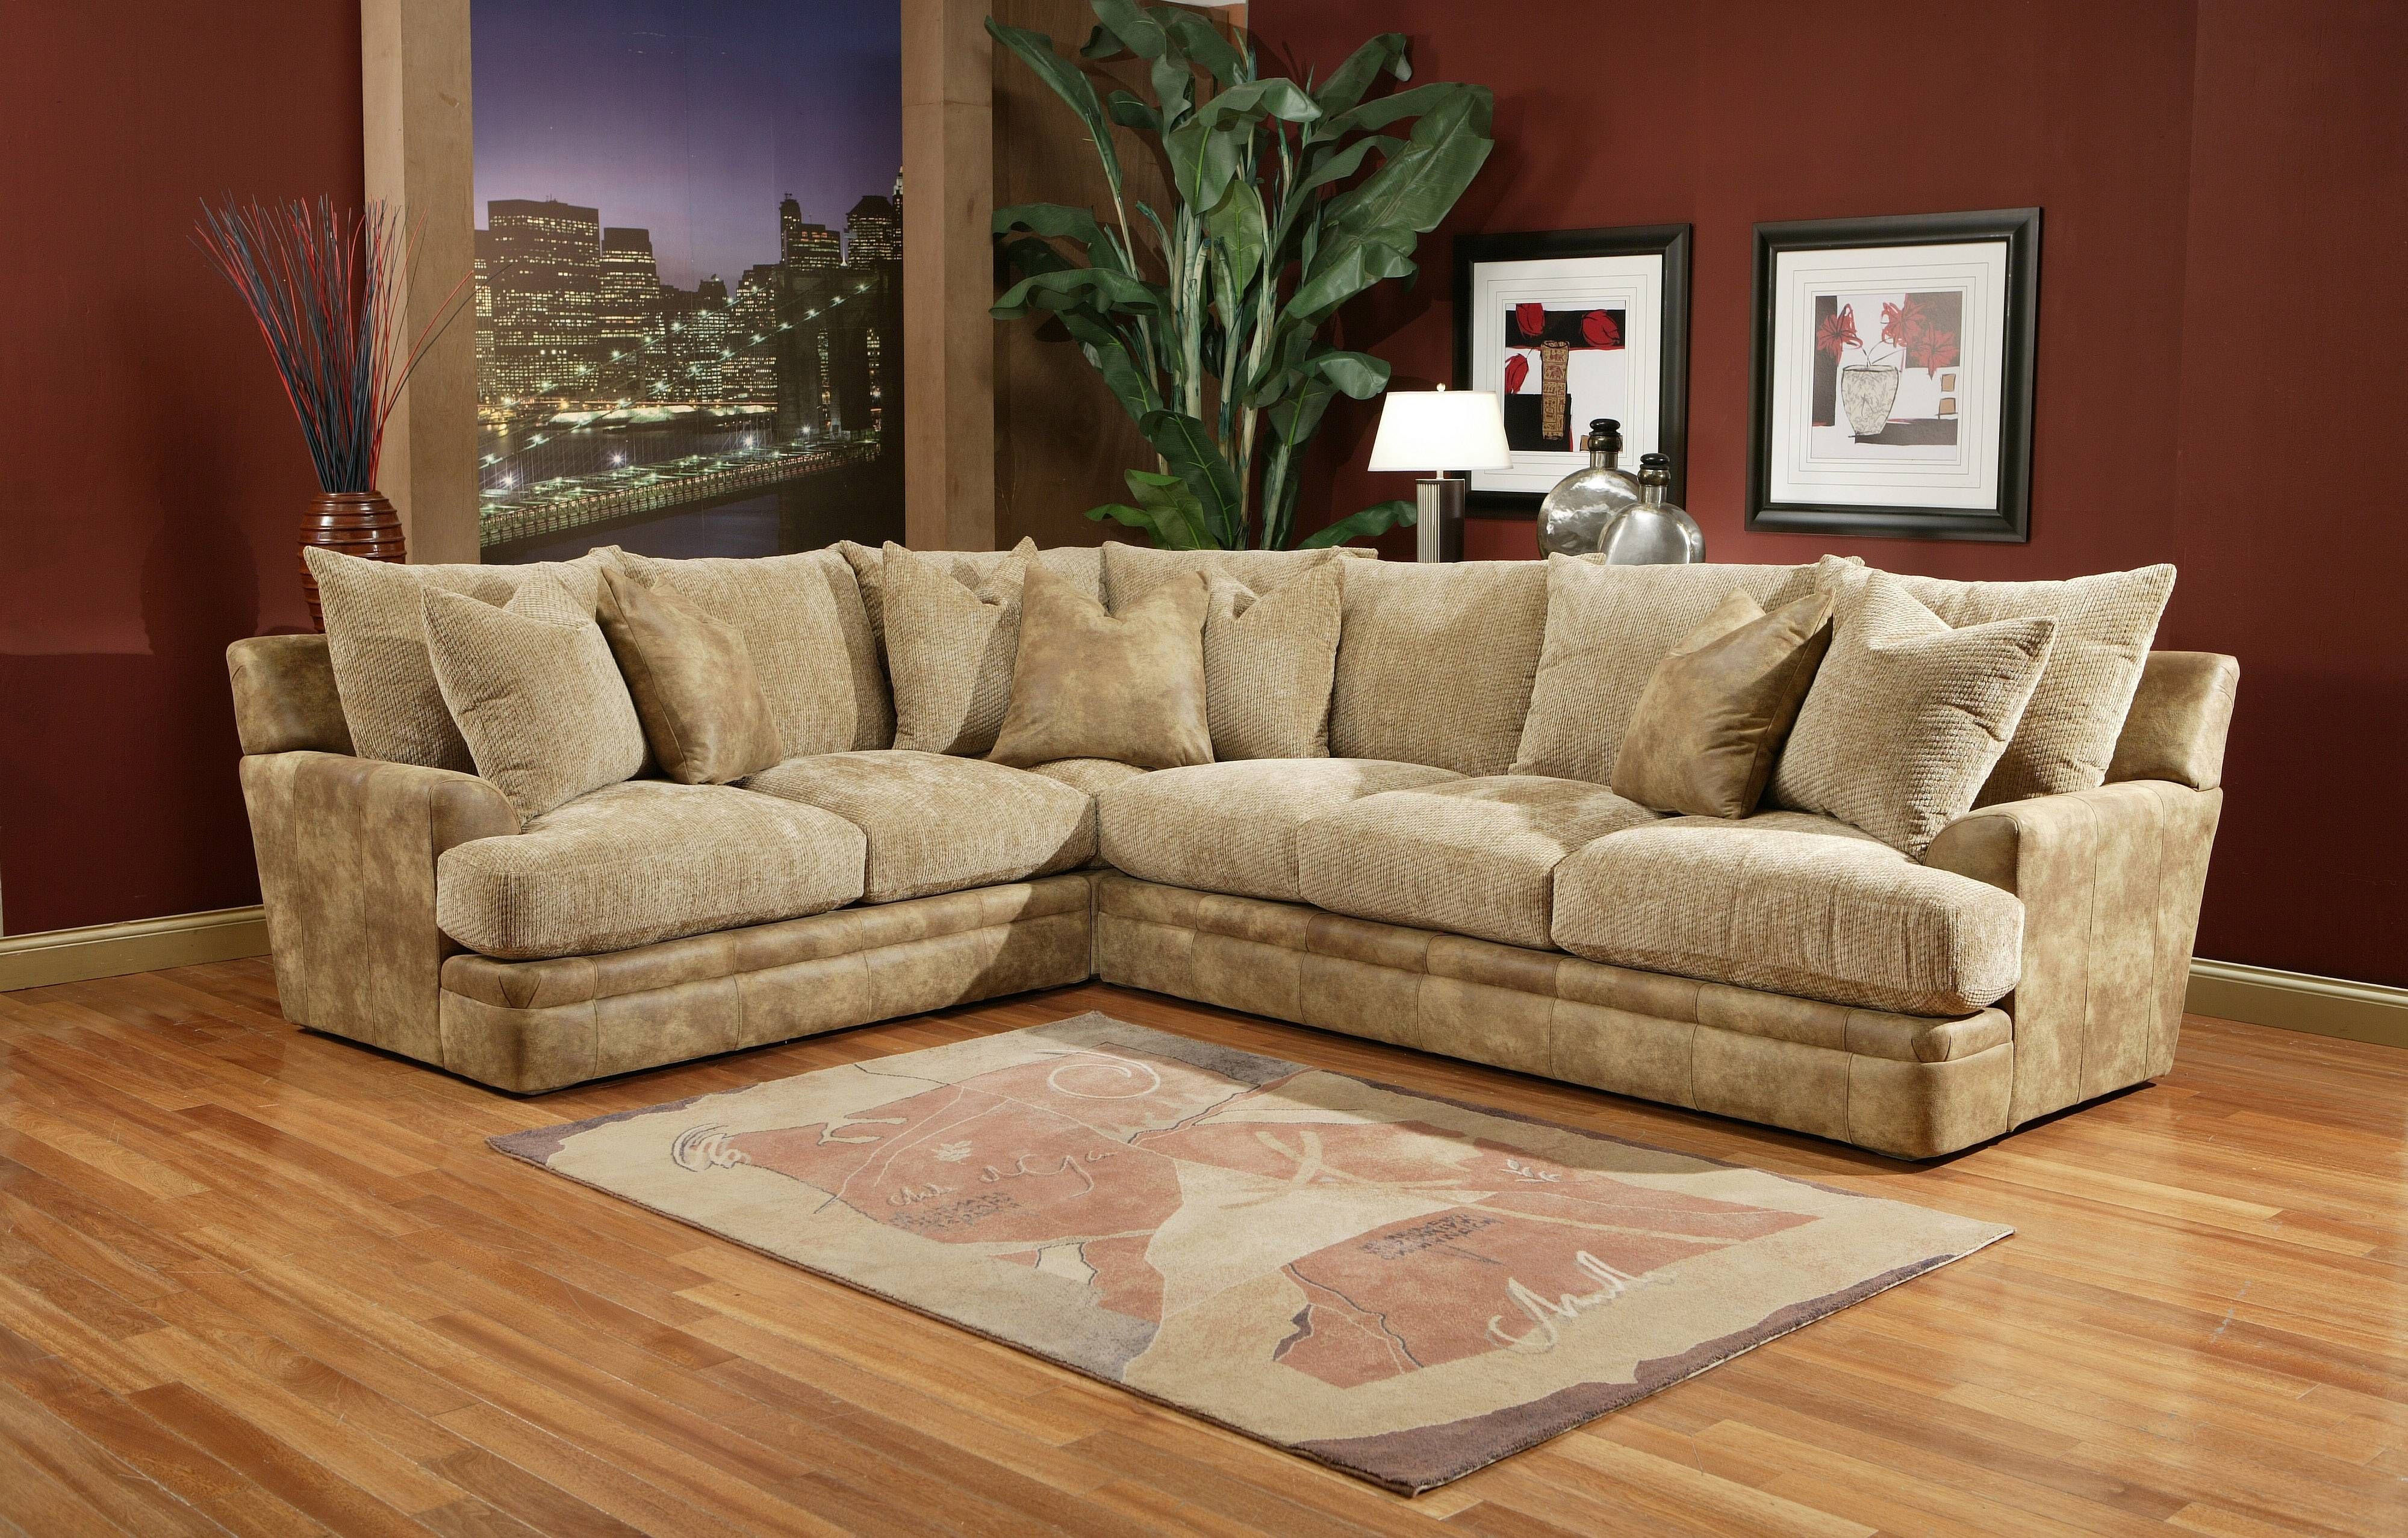 Sofas Center : Cozyown Filled Sectional Sofa For Find Small Sofas Throughout Down Filled Sectional Sofas (View 1 of 30)